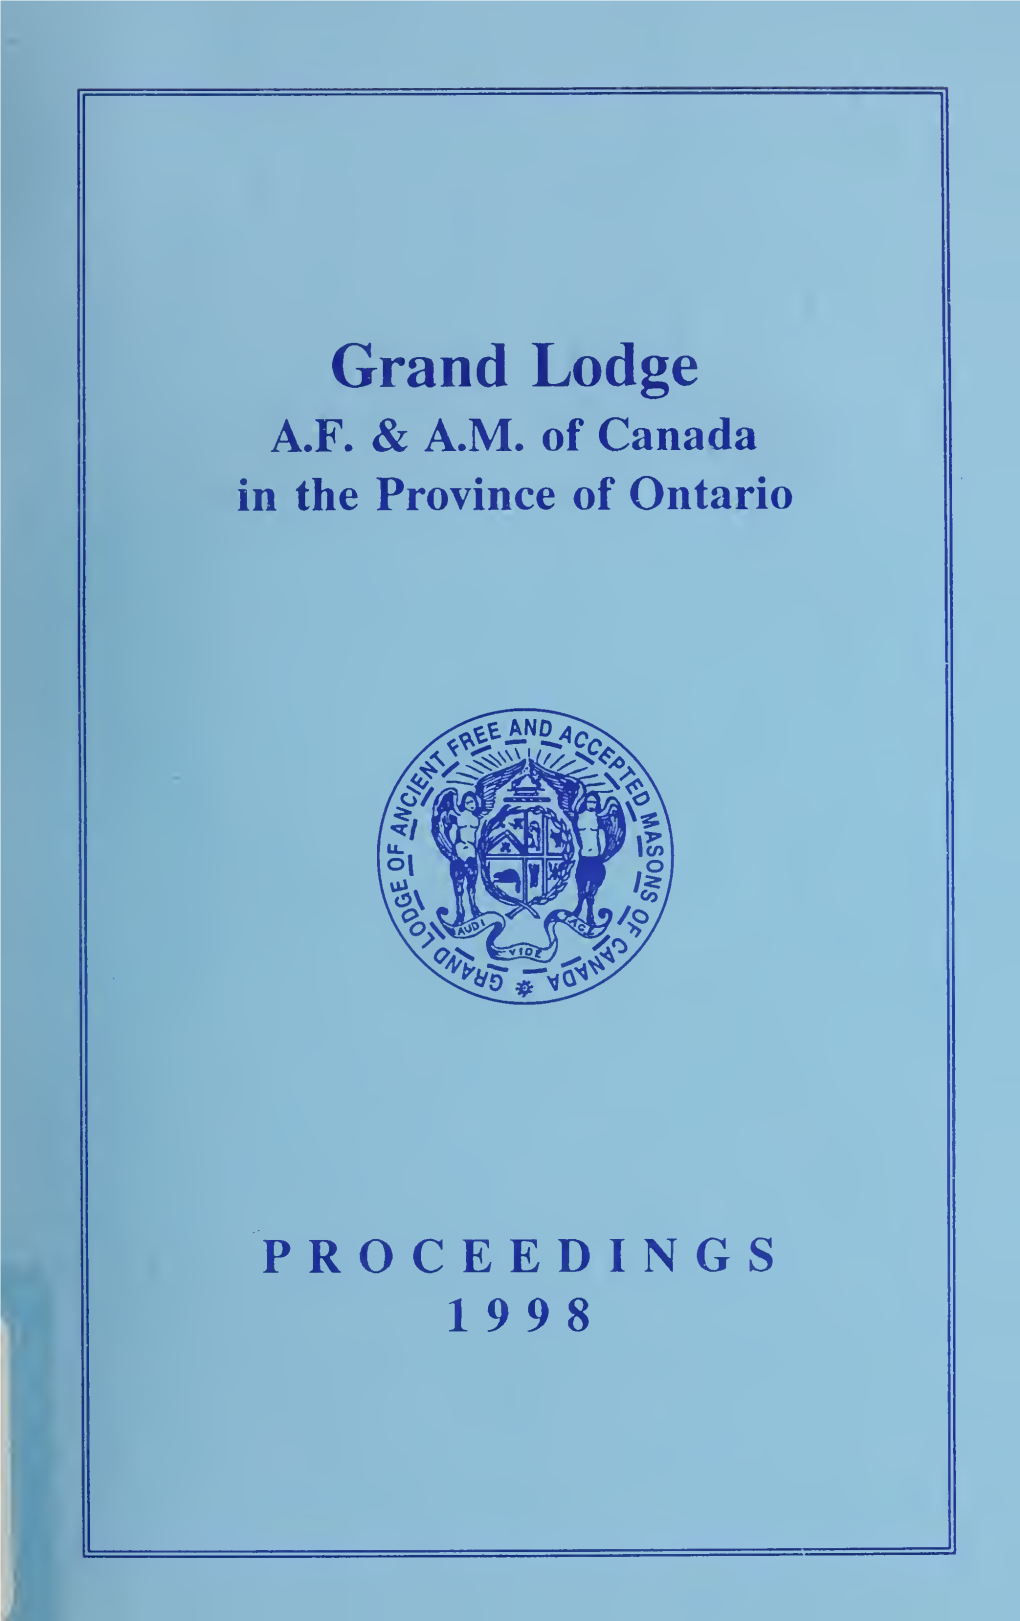 Grand Lodge of AF & AM of Canada, 1998